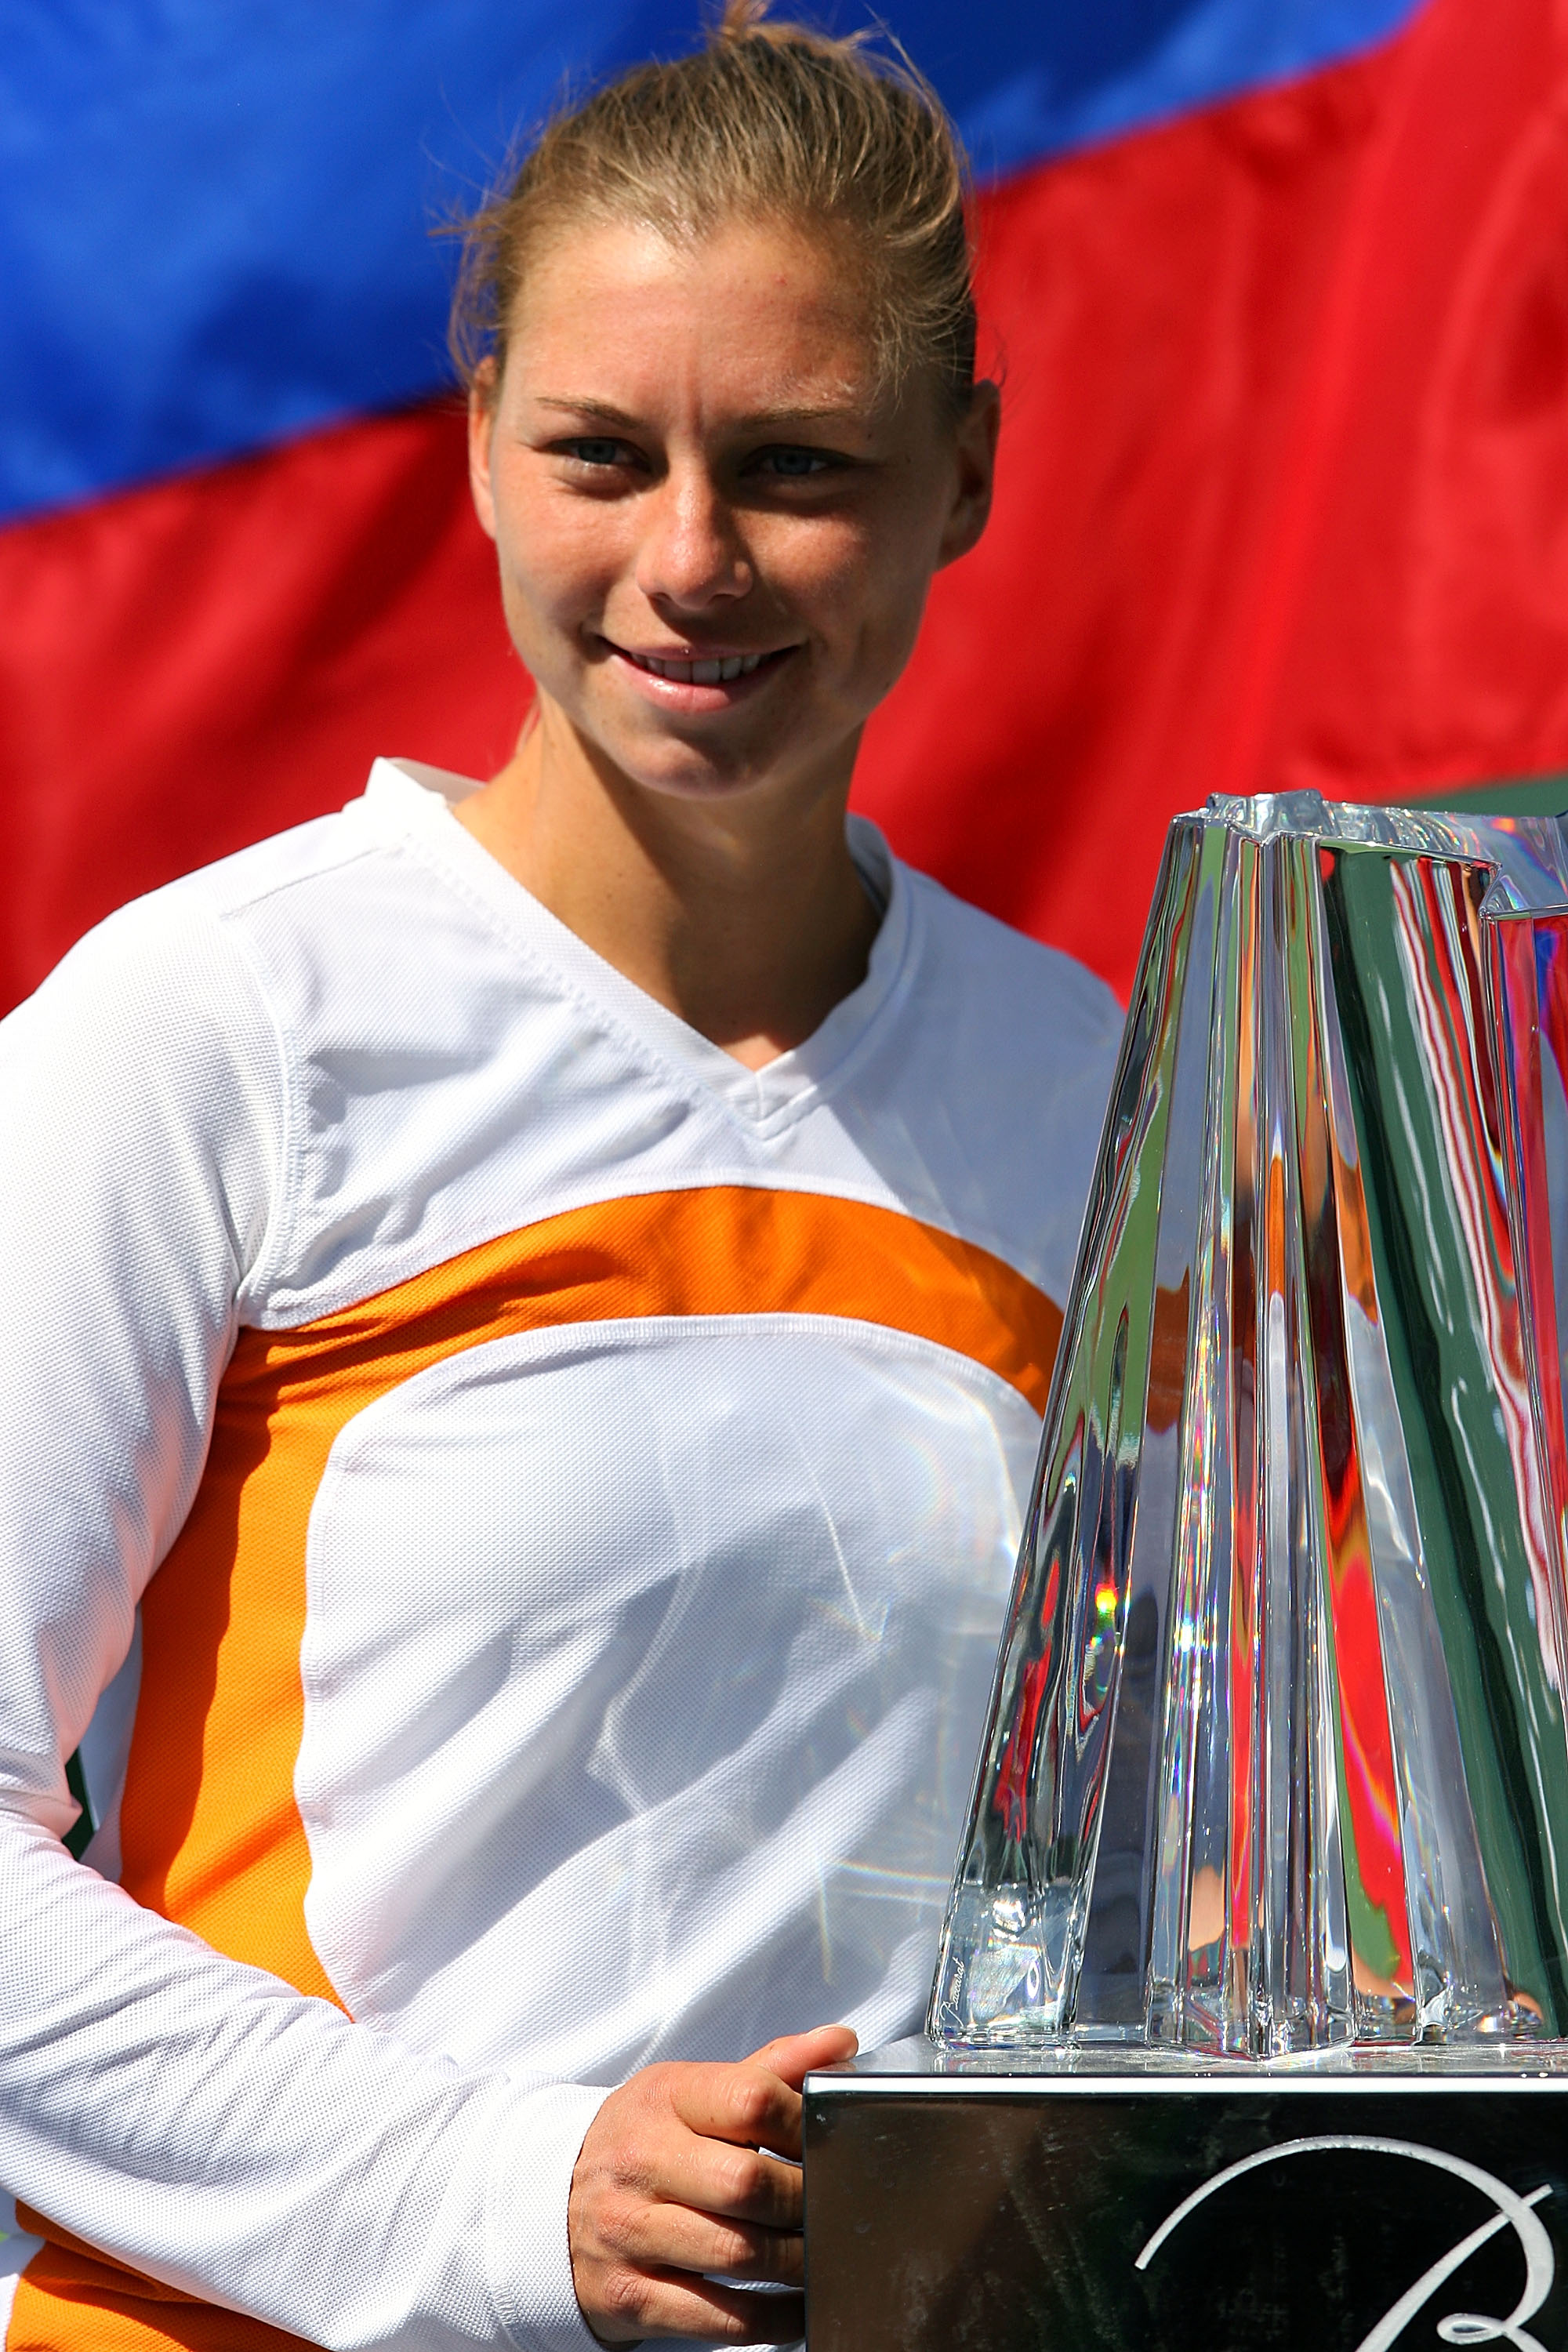 INDIAN WELLS, CA - MARCH 22:  Vera Zvonareva of Russia poses with the championship trophy after defeating Ana Ivanovic of Serbia in the final of the BNP Paribas Open on March 22, 2009 at the Indian Wells Tennis Garden in Indian Wells, California.  (Photo